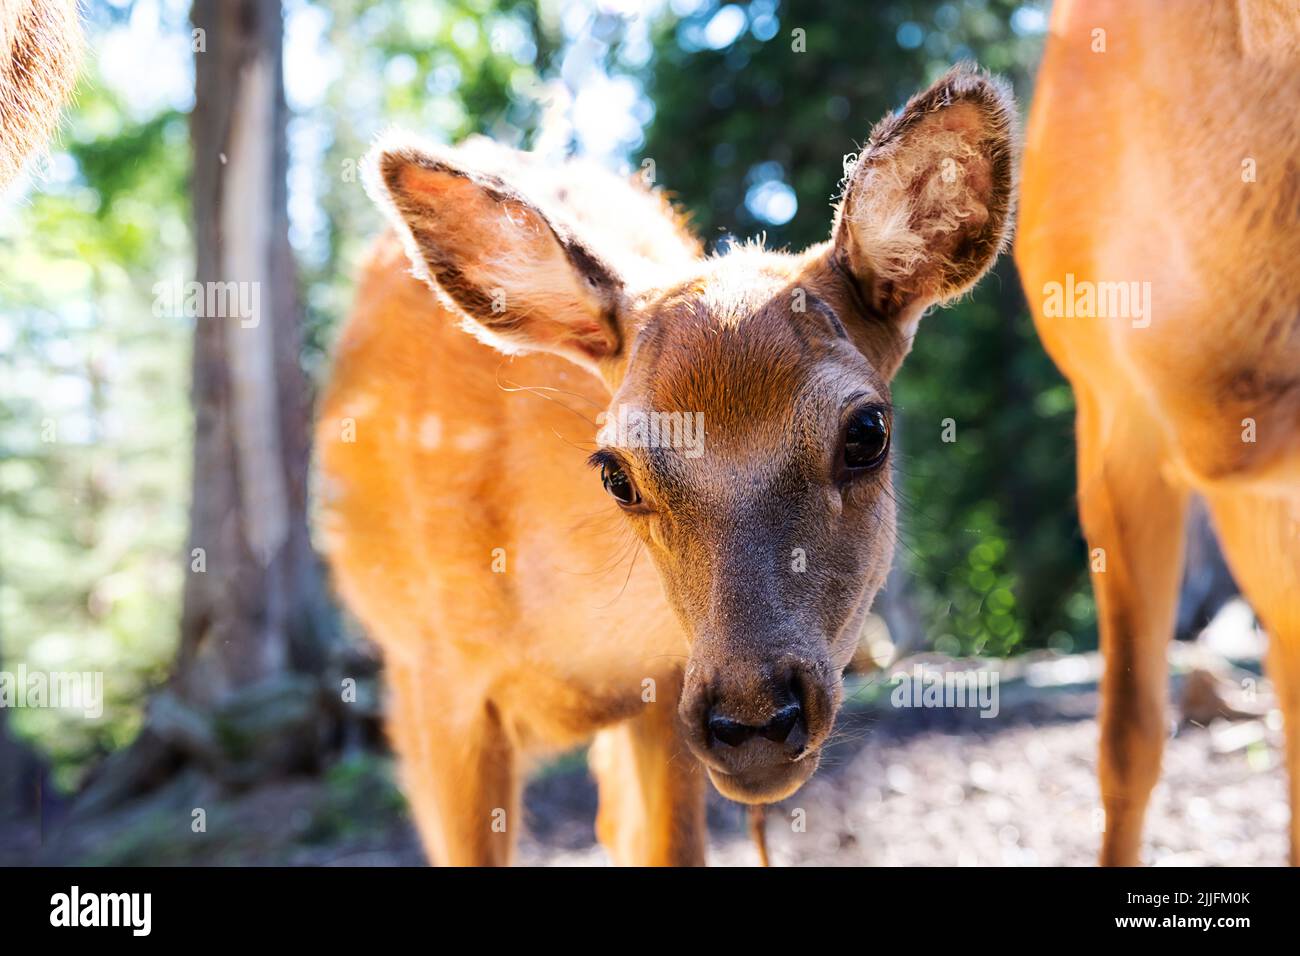 Curious fawn looks at camera. Cute little spotted deer portrait. Stock Photo